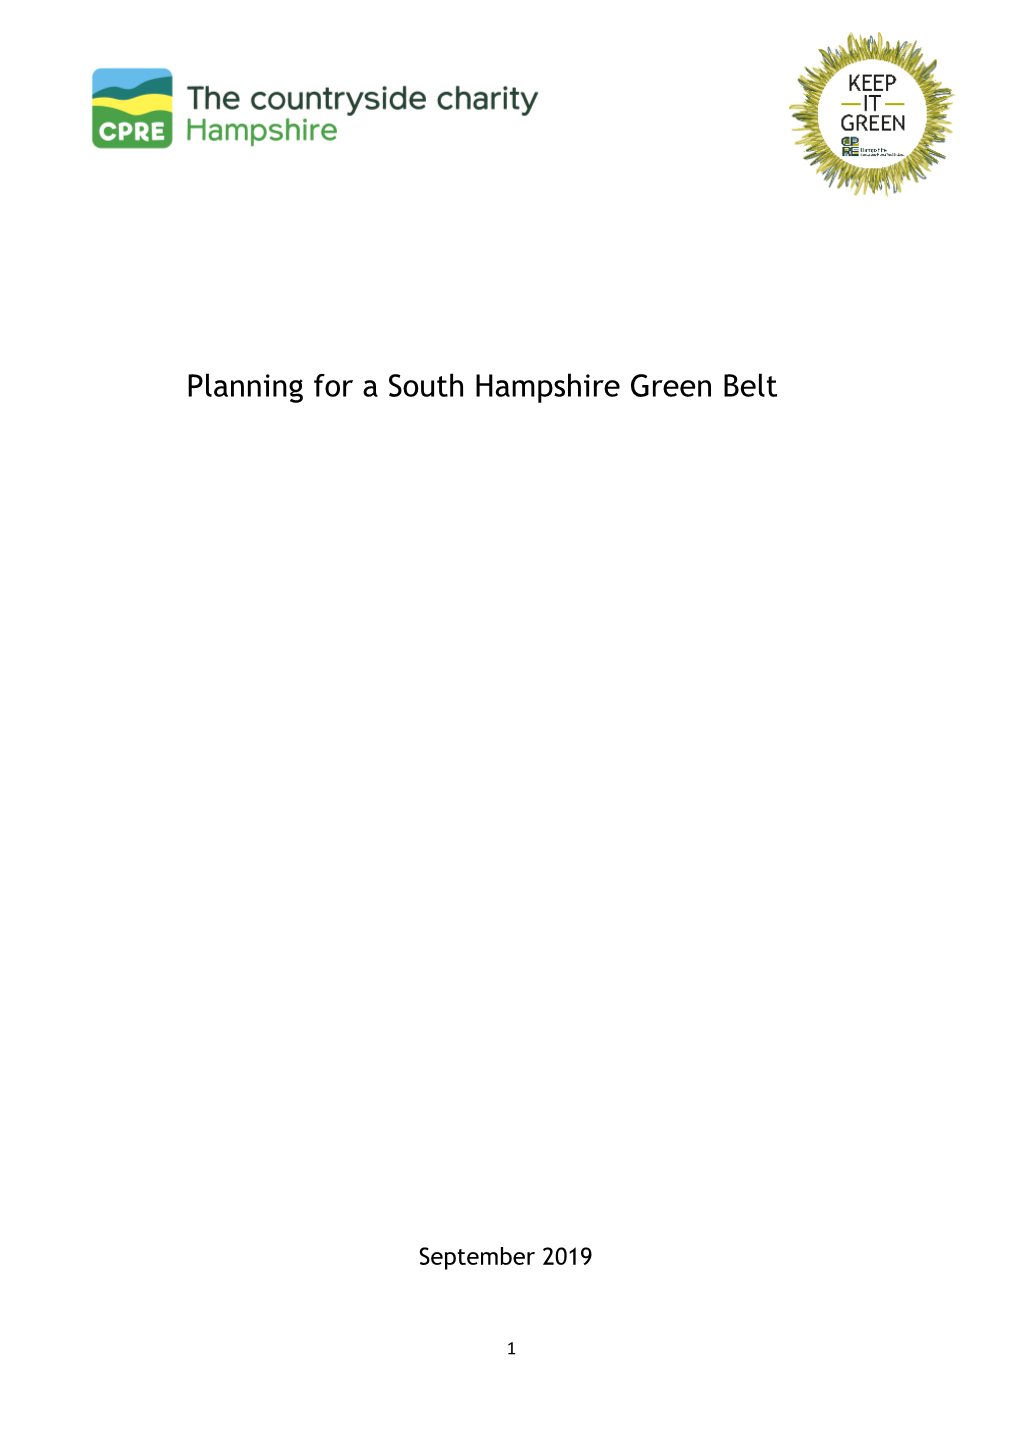 Read Our Planning for a South Hampshire Green Belt Paper